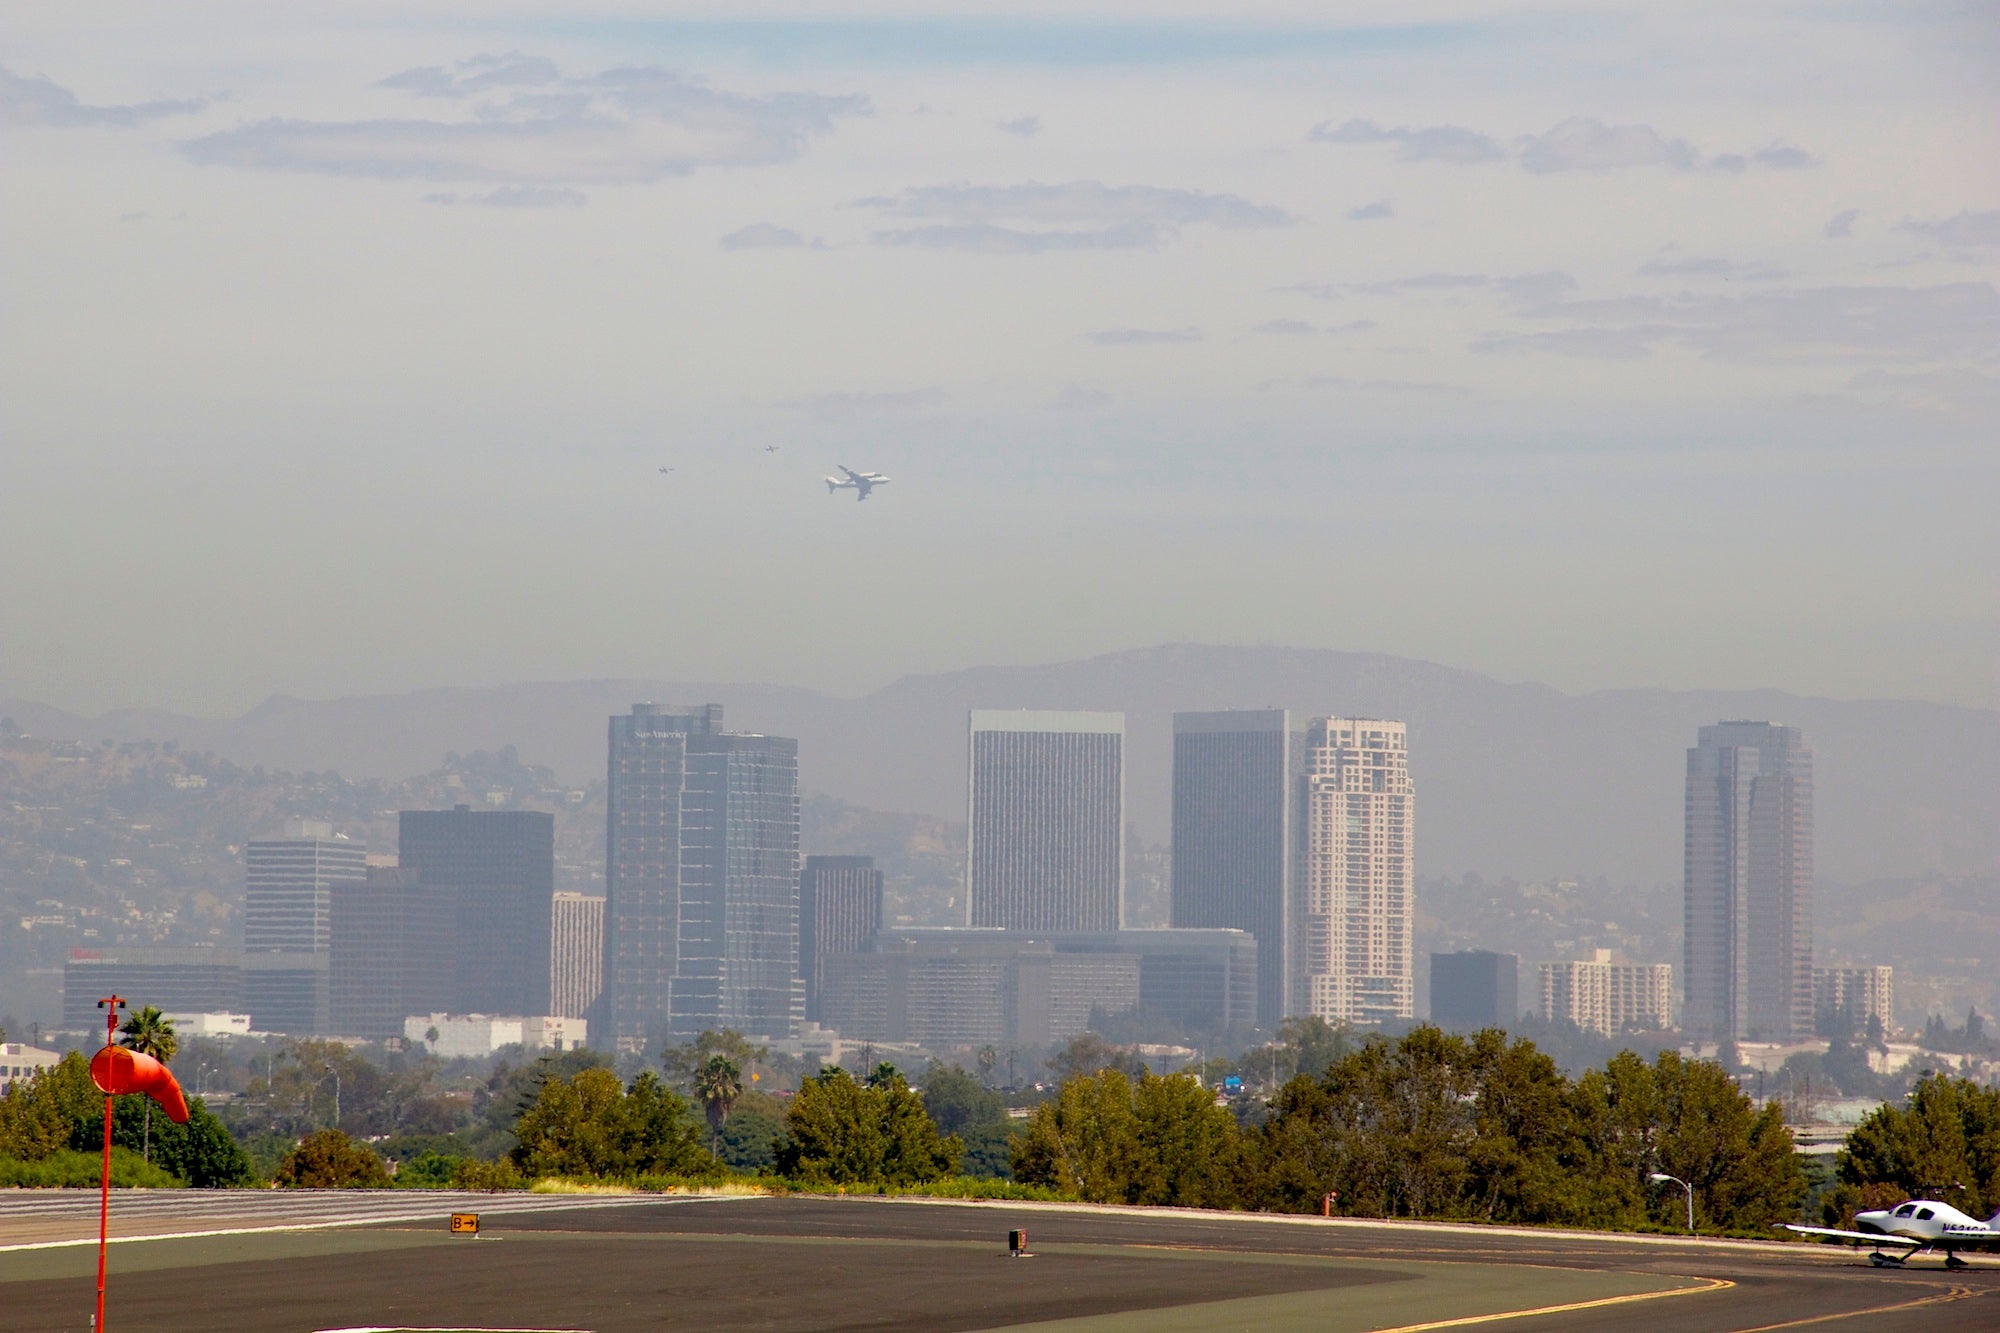 Overflying Los Angeles